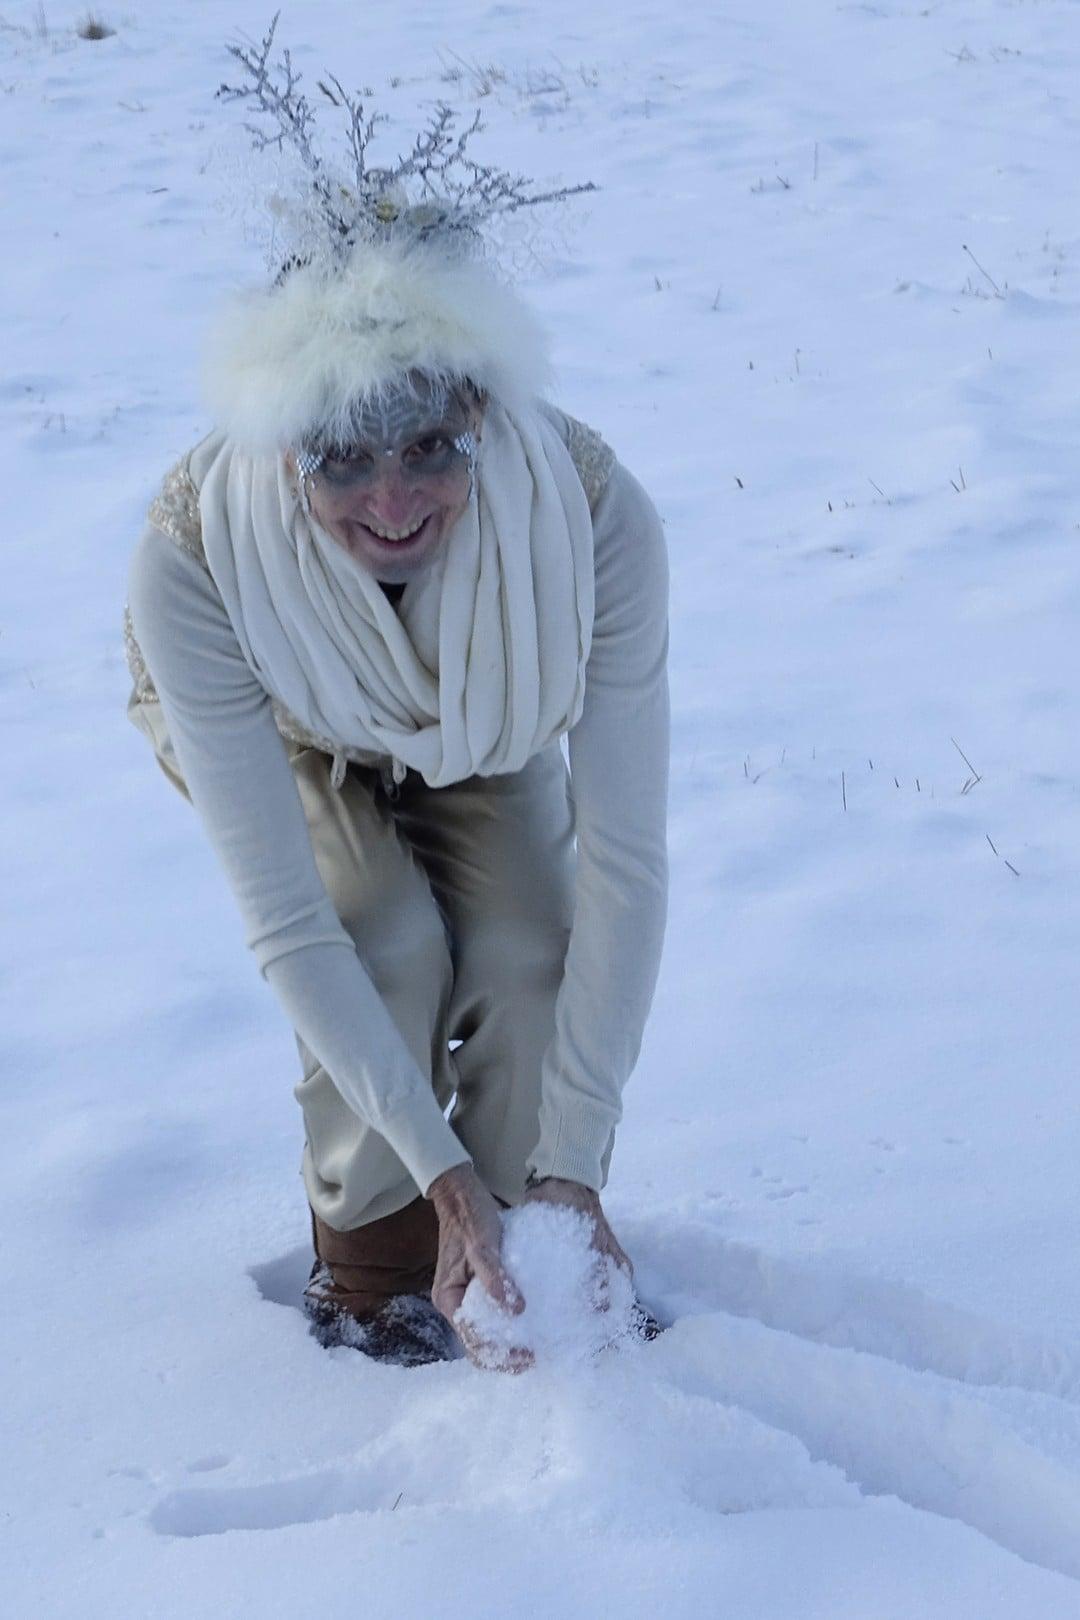 Robin Botie in Ithaca, New York, photographs a Snow Queen on the winter solstice 2019.